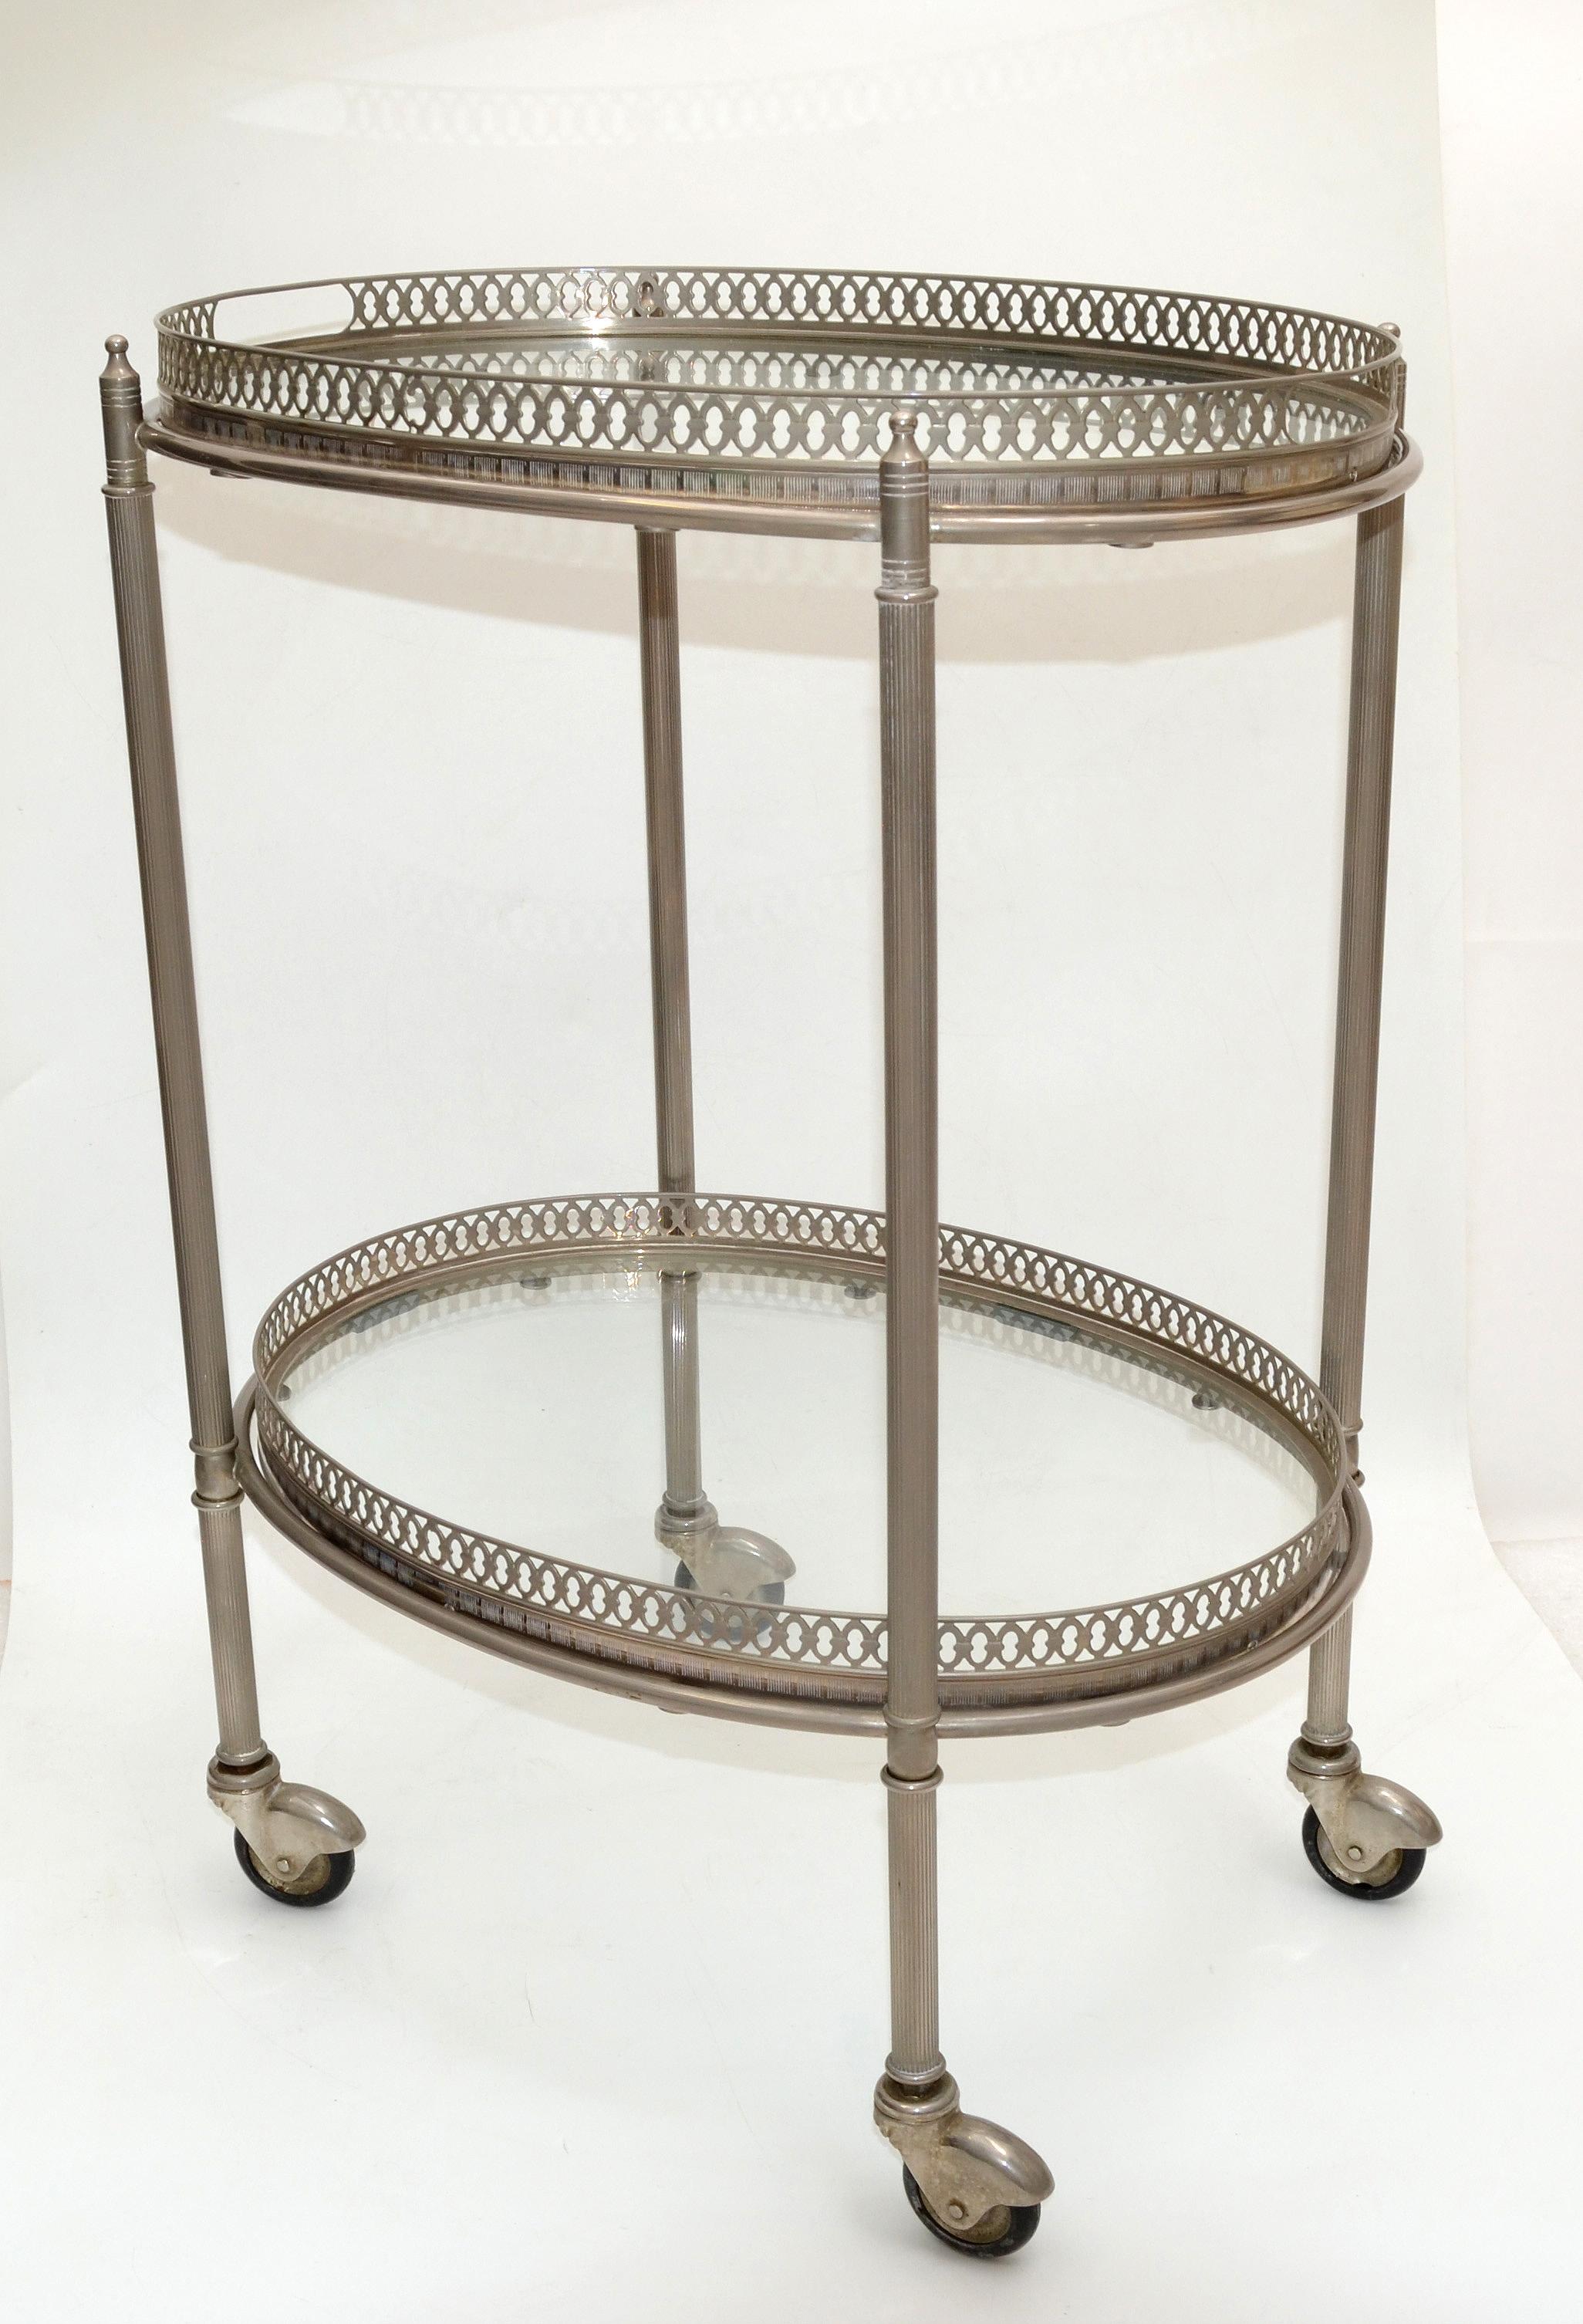 Very attractive Maison Lancel silvered bronze 2 tray oval bar cart. 
Both trays are removable. 
Finely cast galleries give this piece a neoclassical flair.
All original wheels which run smoothly.
Measures: Space from the floor to the top shelf